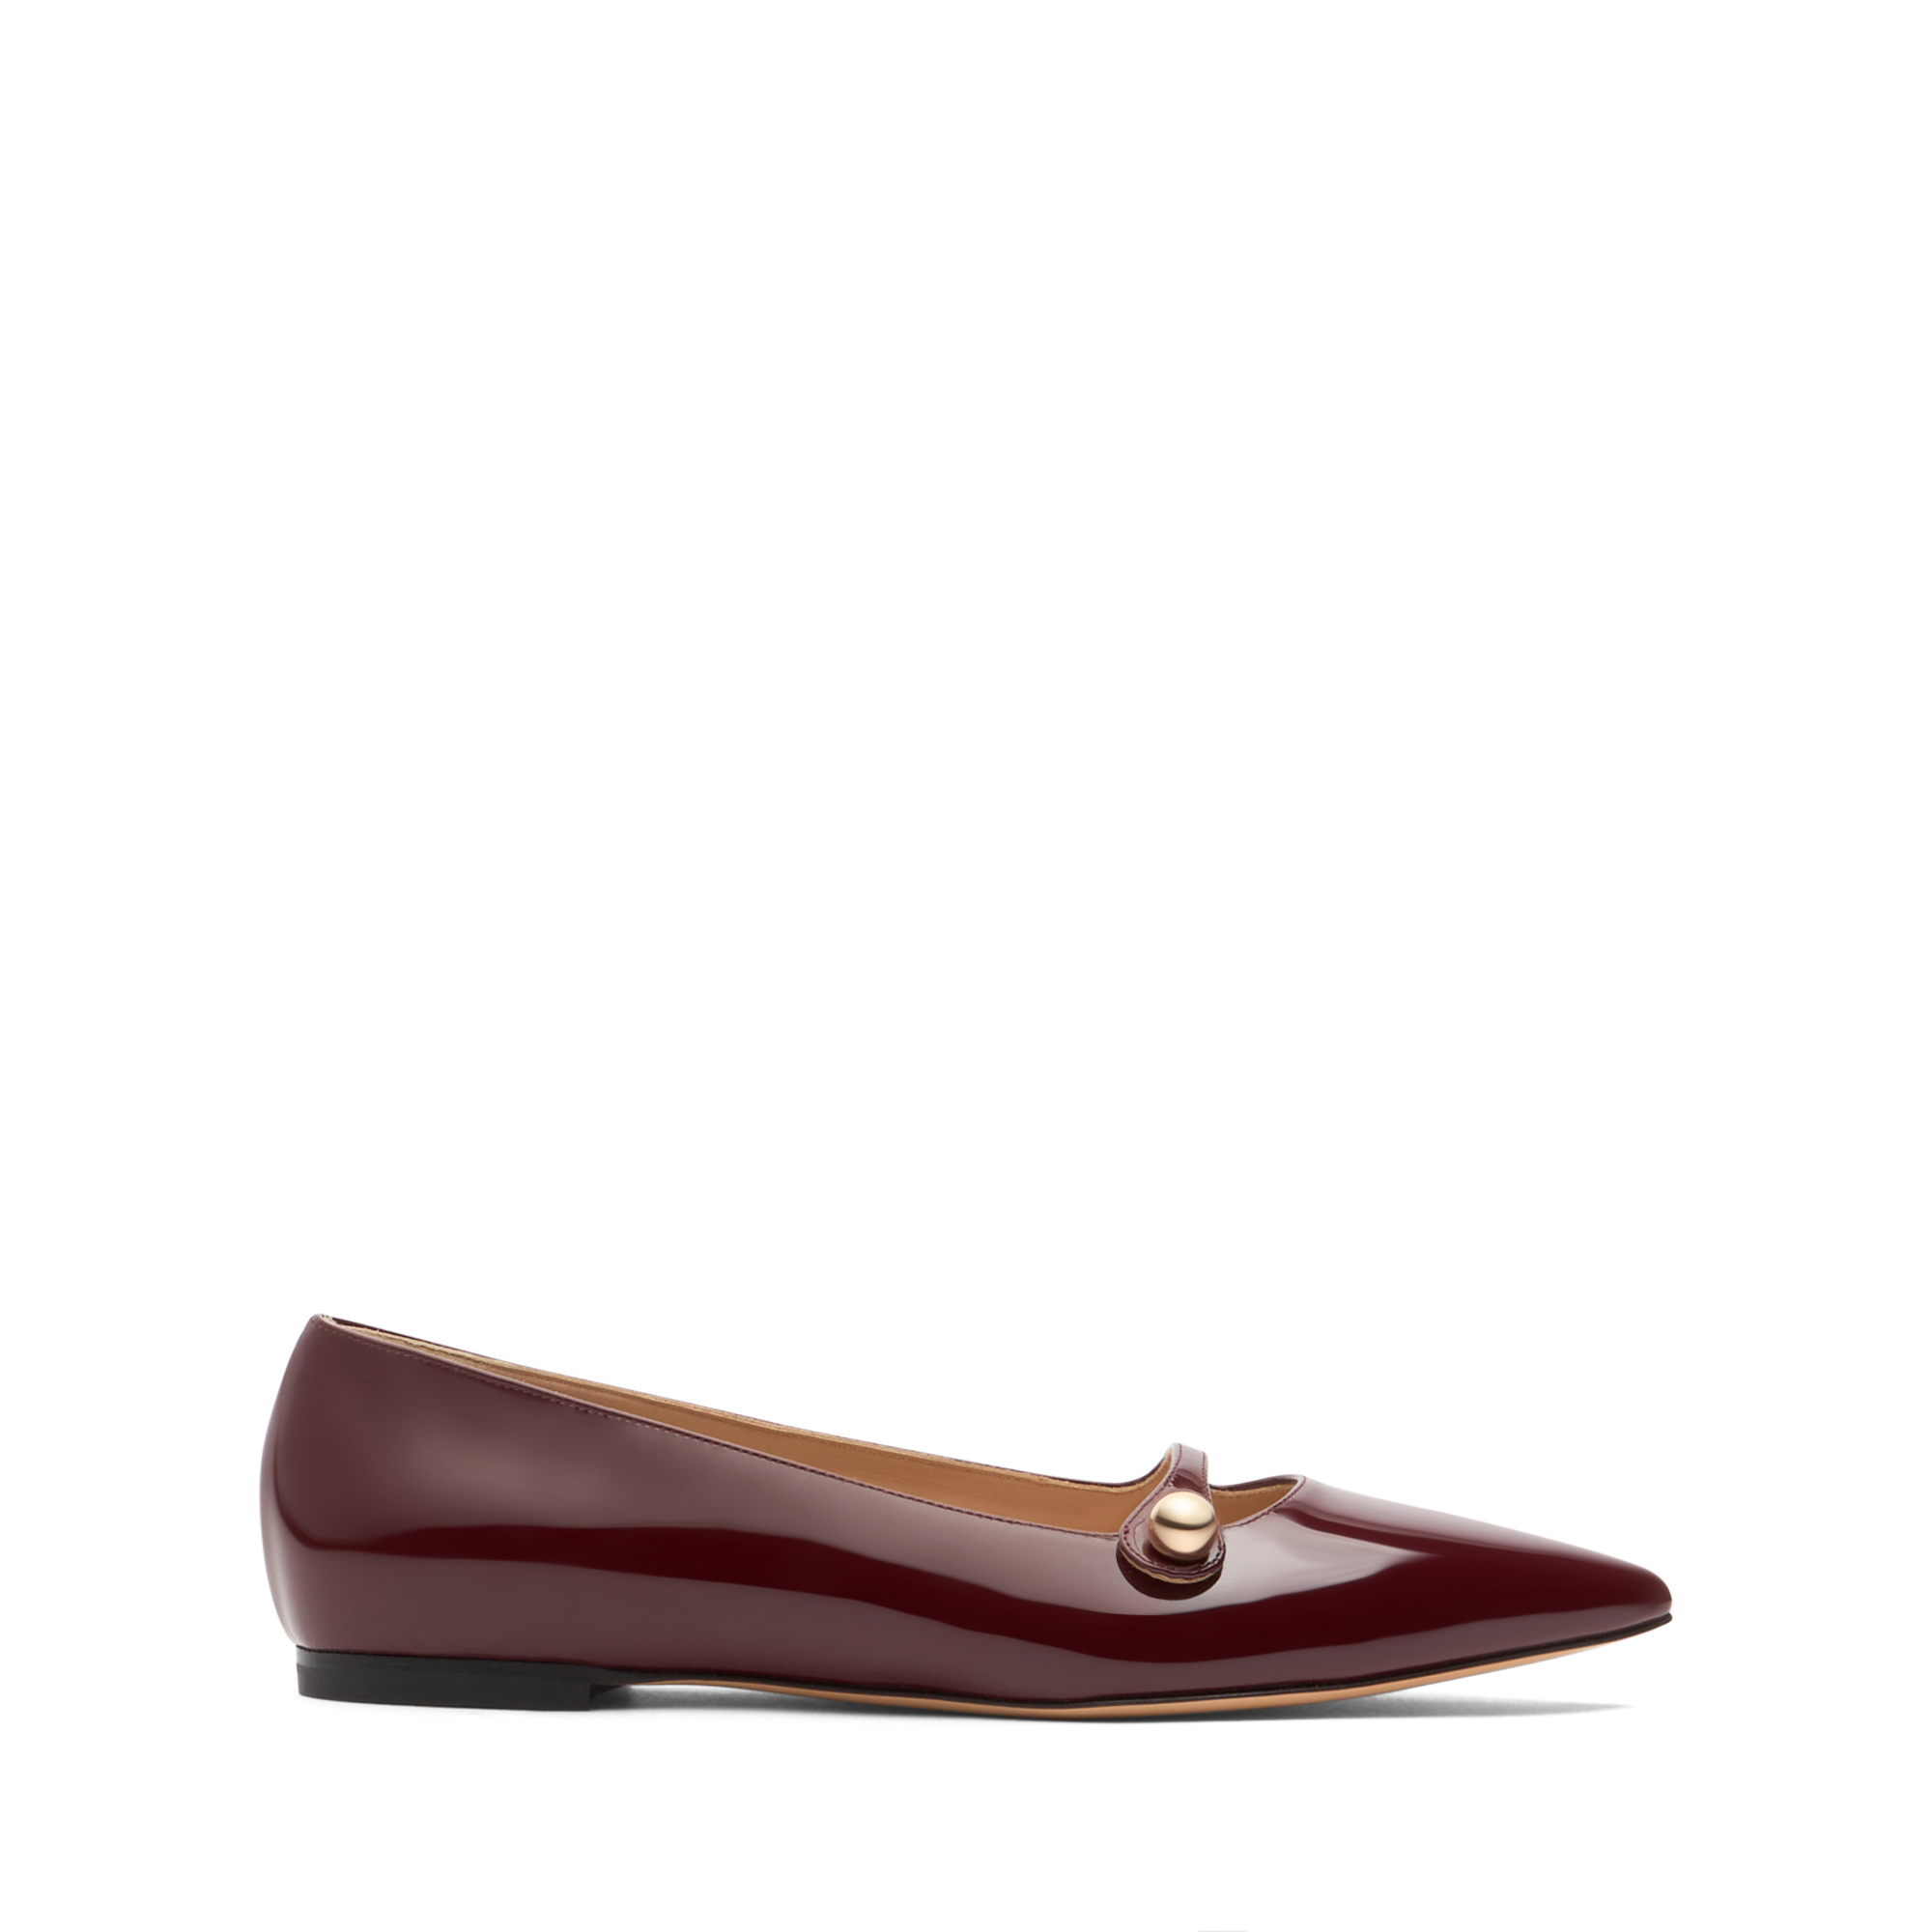 Shop Casadei New Ballerina Cleo - Woman Flats And Loafers Ladybug 39